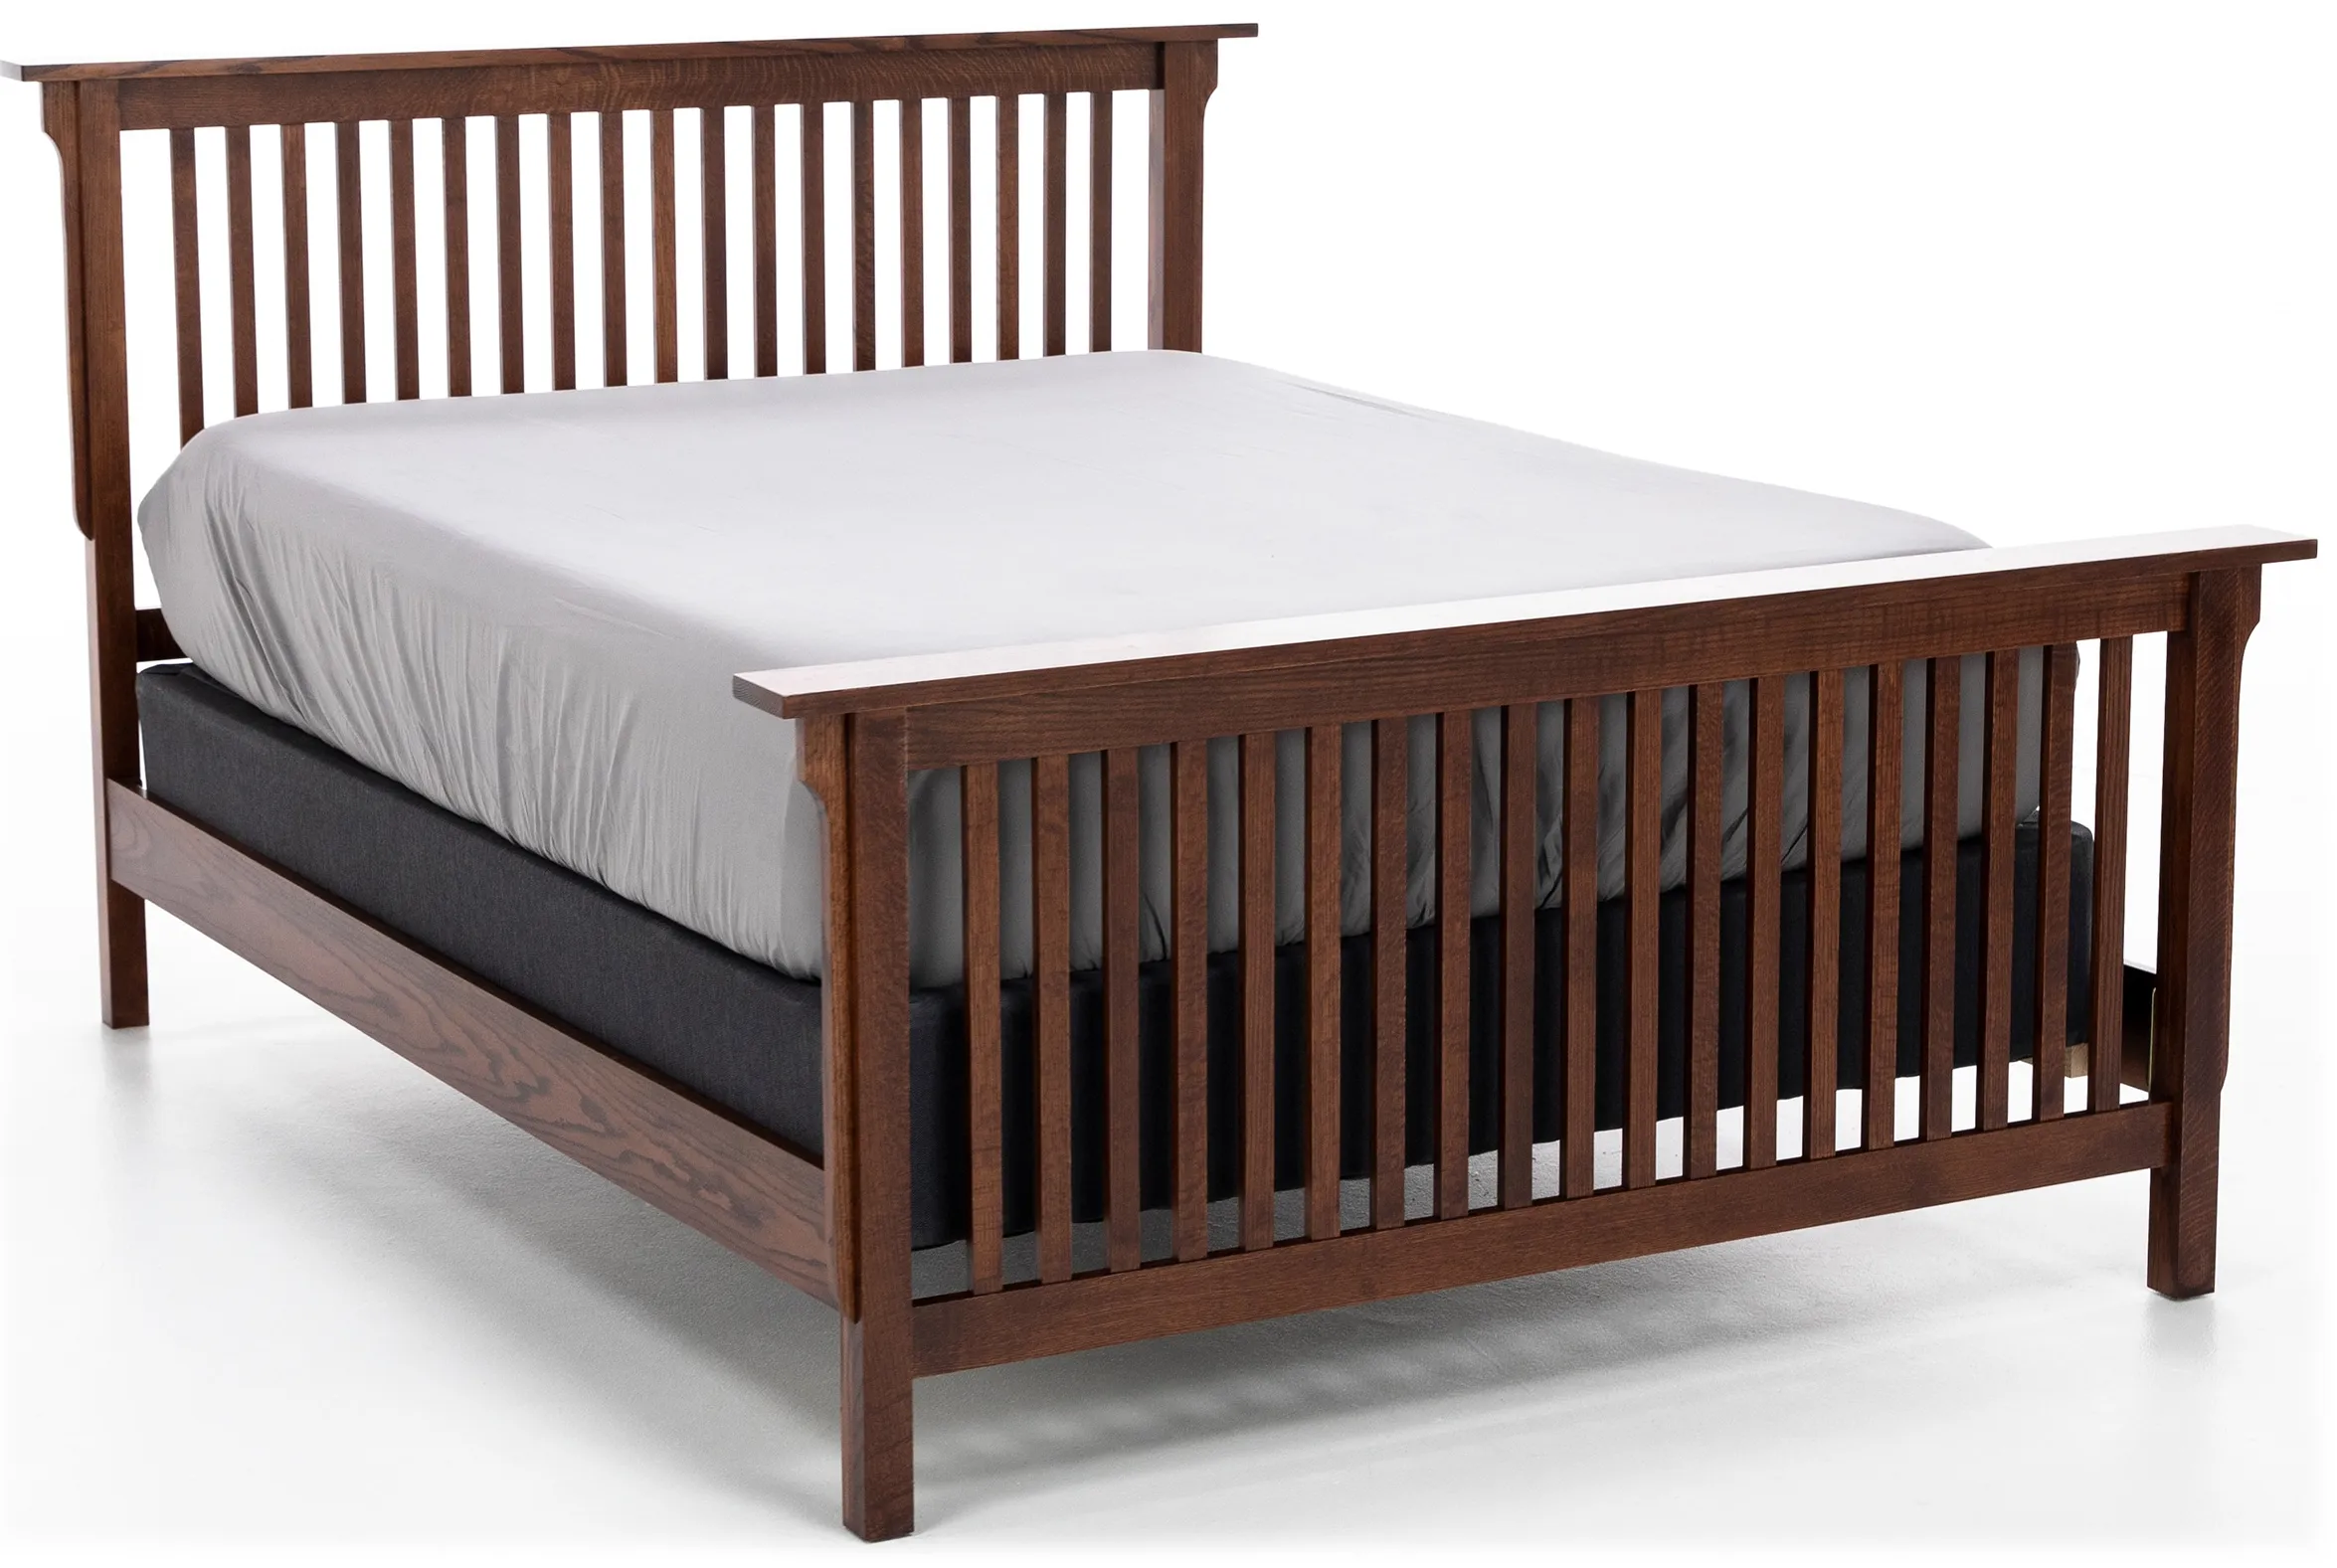 Witmer American Mission #80 Queen Slat Bed W/32" Footboard